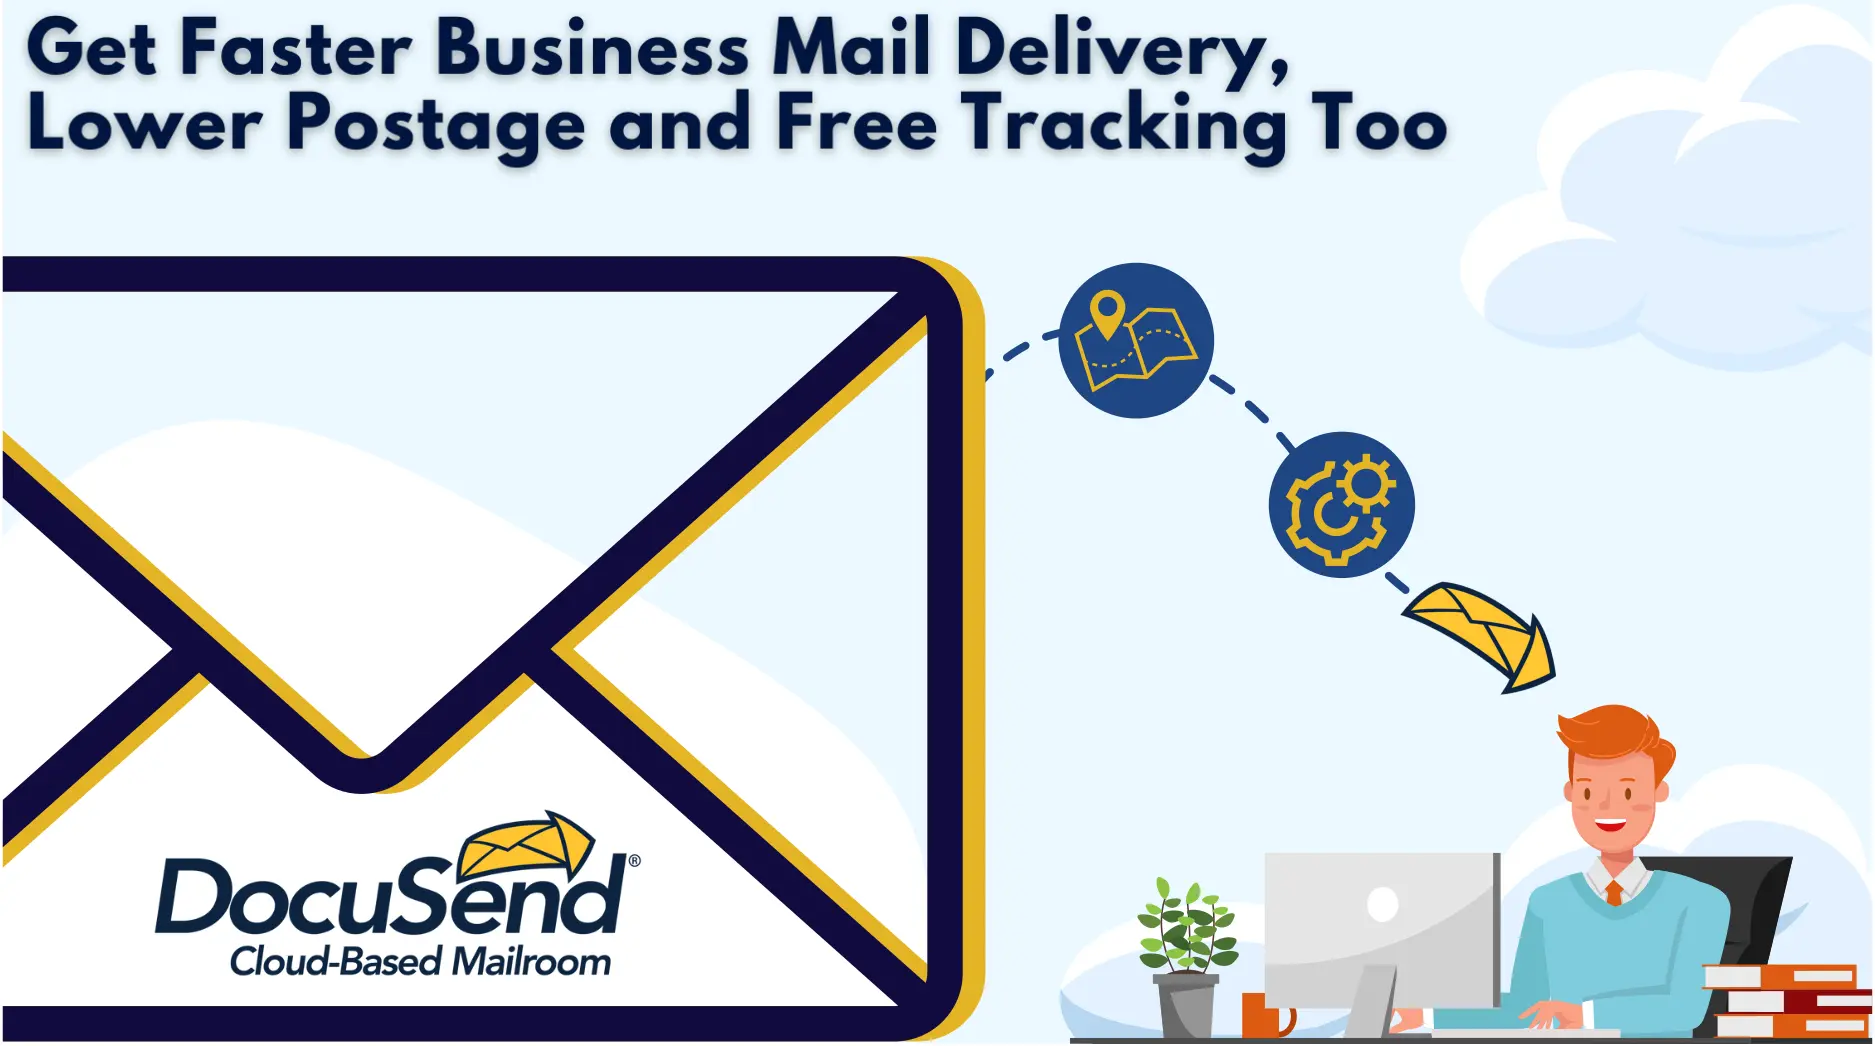 Business Mail Delivery Automation